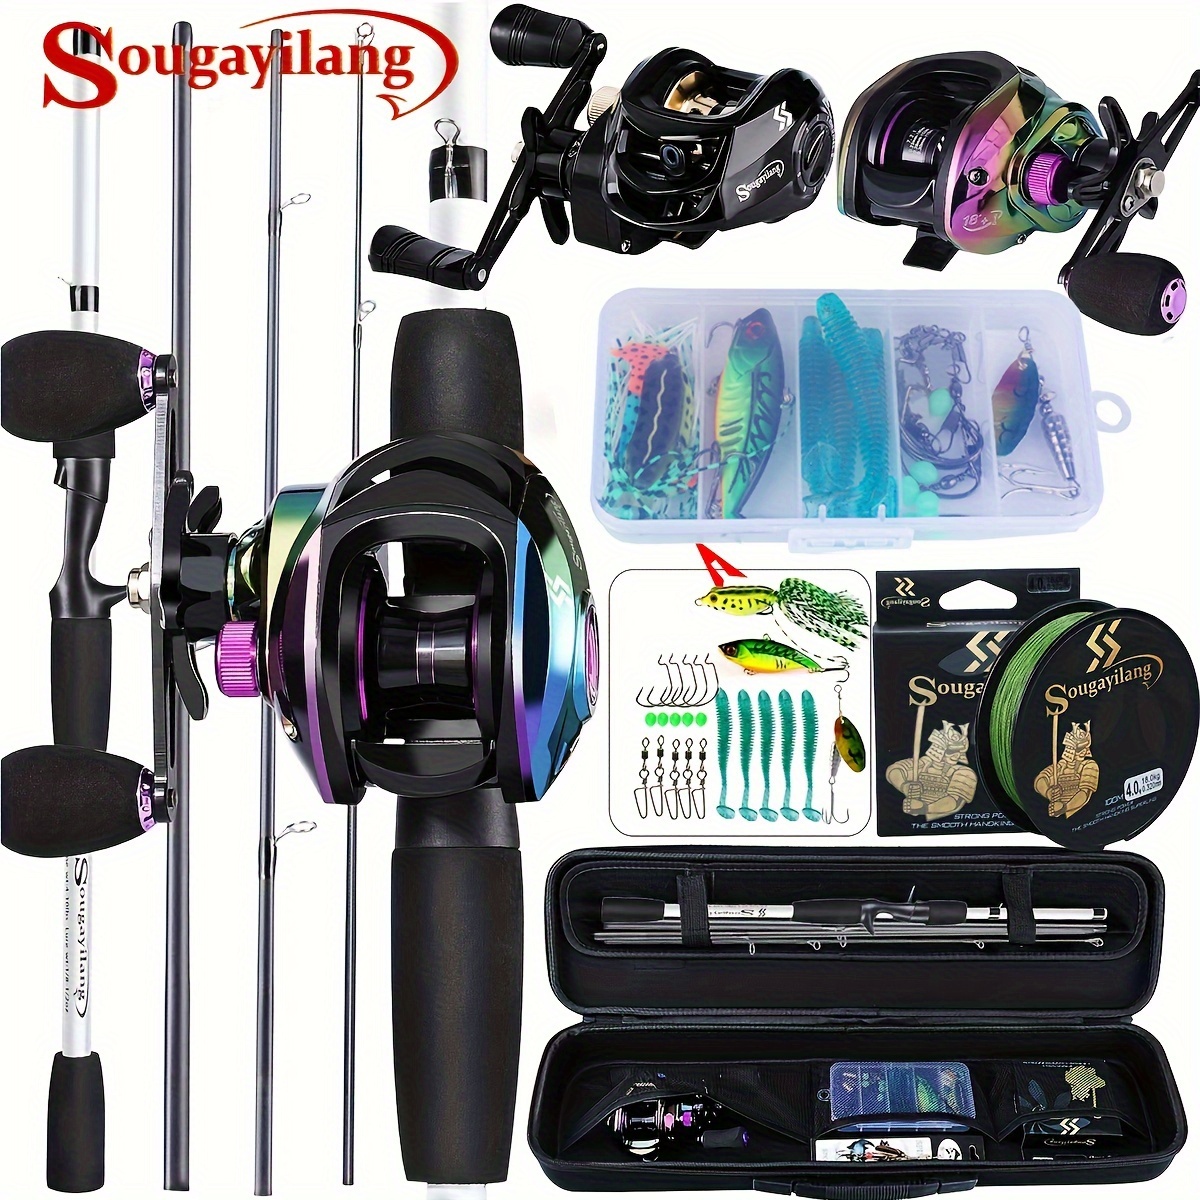 

Sougayilang Fishing Lure Tackle Set With Bag, Including 4 Sections 6.5ft Fishing Rod & 7.2: 1 Baitcasting Reel Max Drag 12lbs & Fishing Line & Artificial Fishing Soft/hard Bait & Accessories